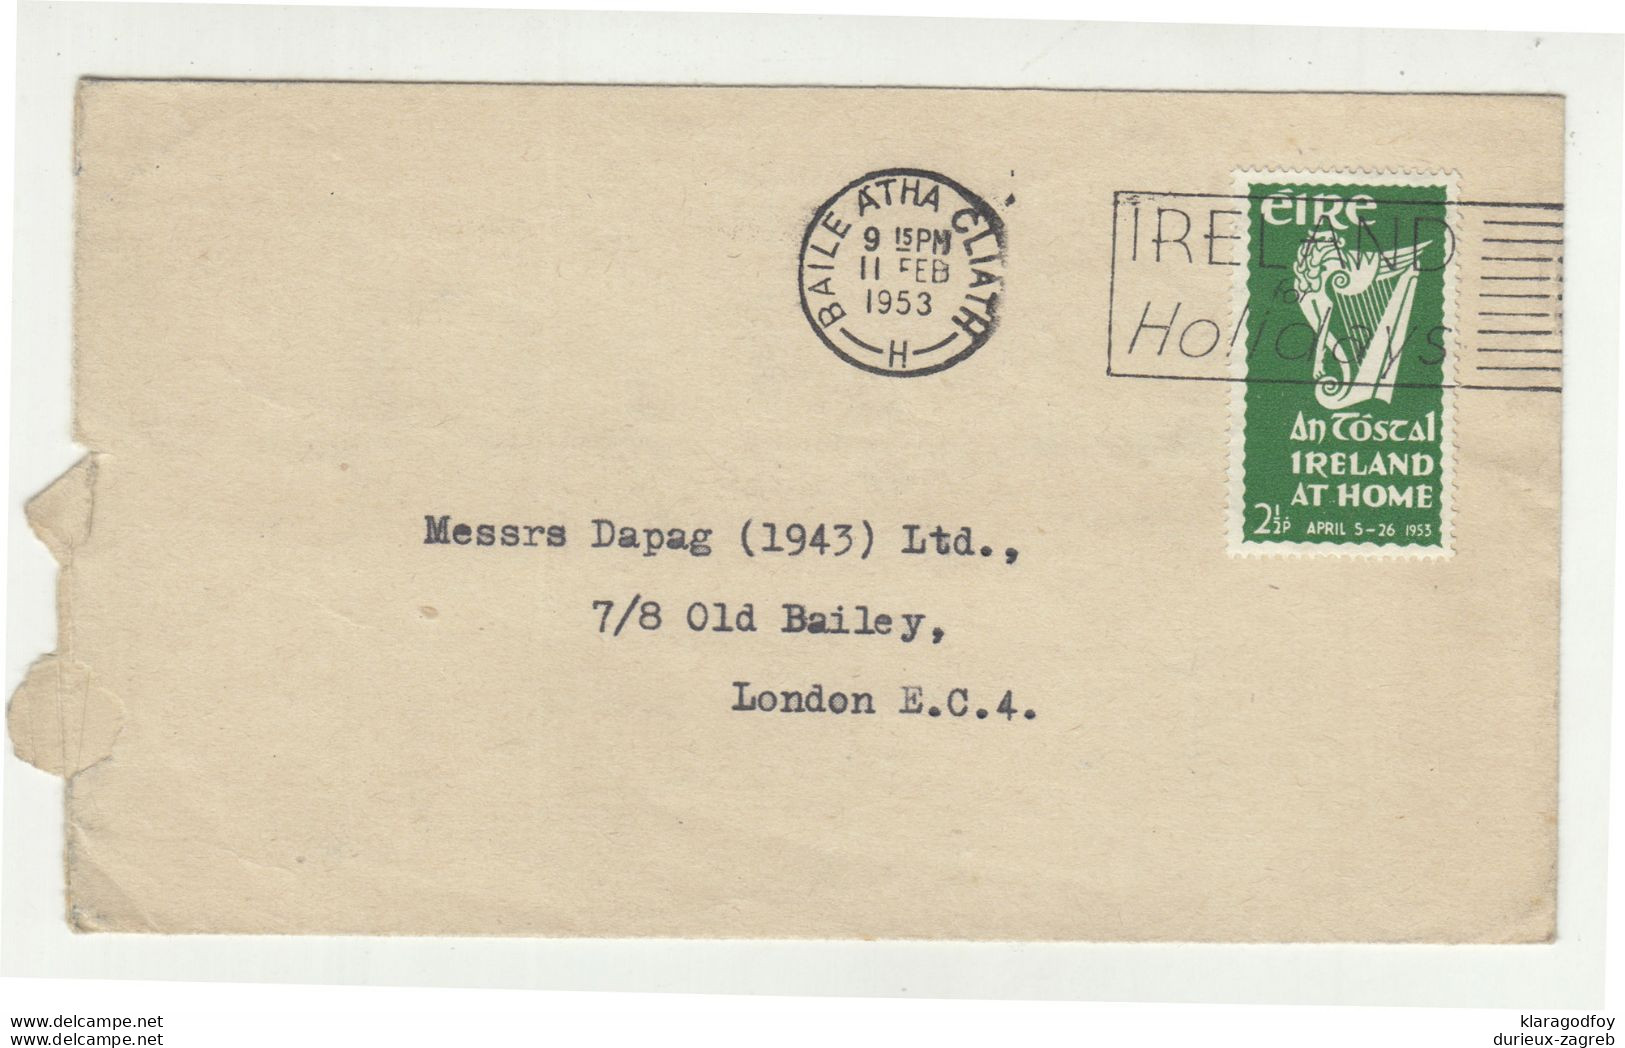 Ireland Letter Cover Posted 1953 To London - Ireland Holidays Slogan Postmark 210201 - Covers & Documents